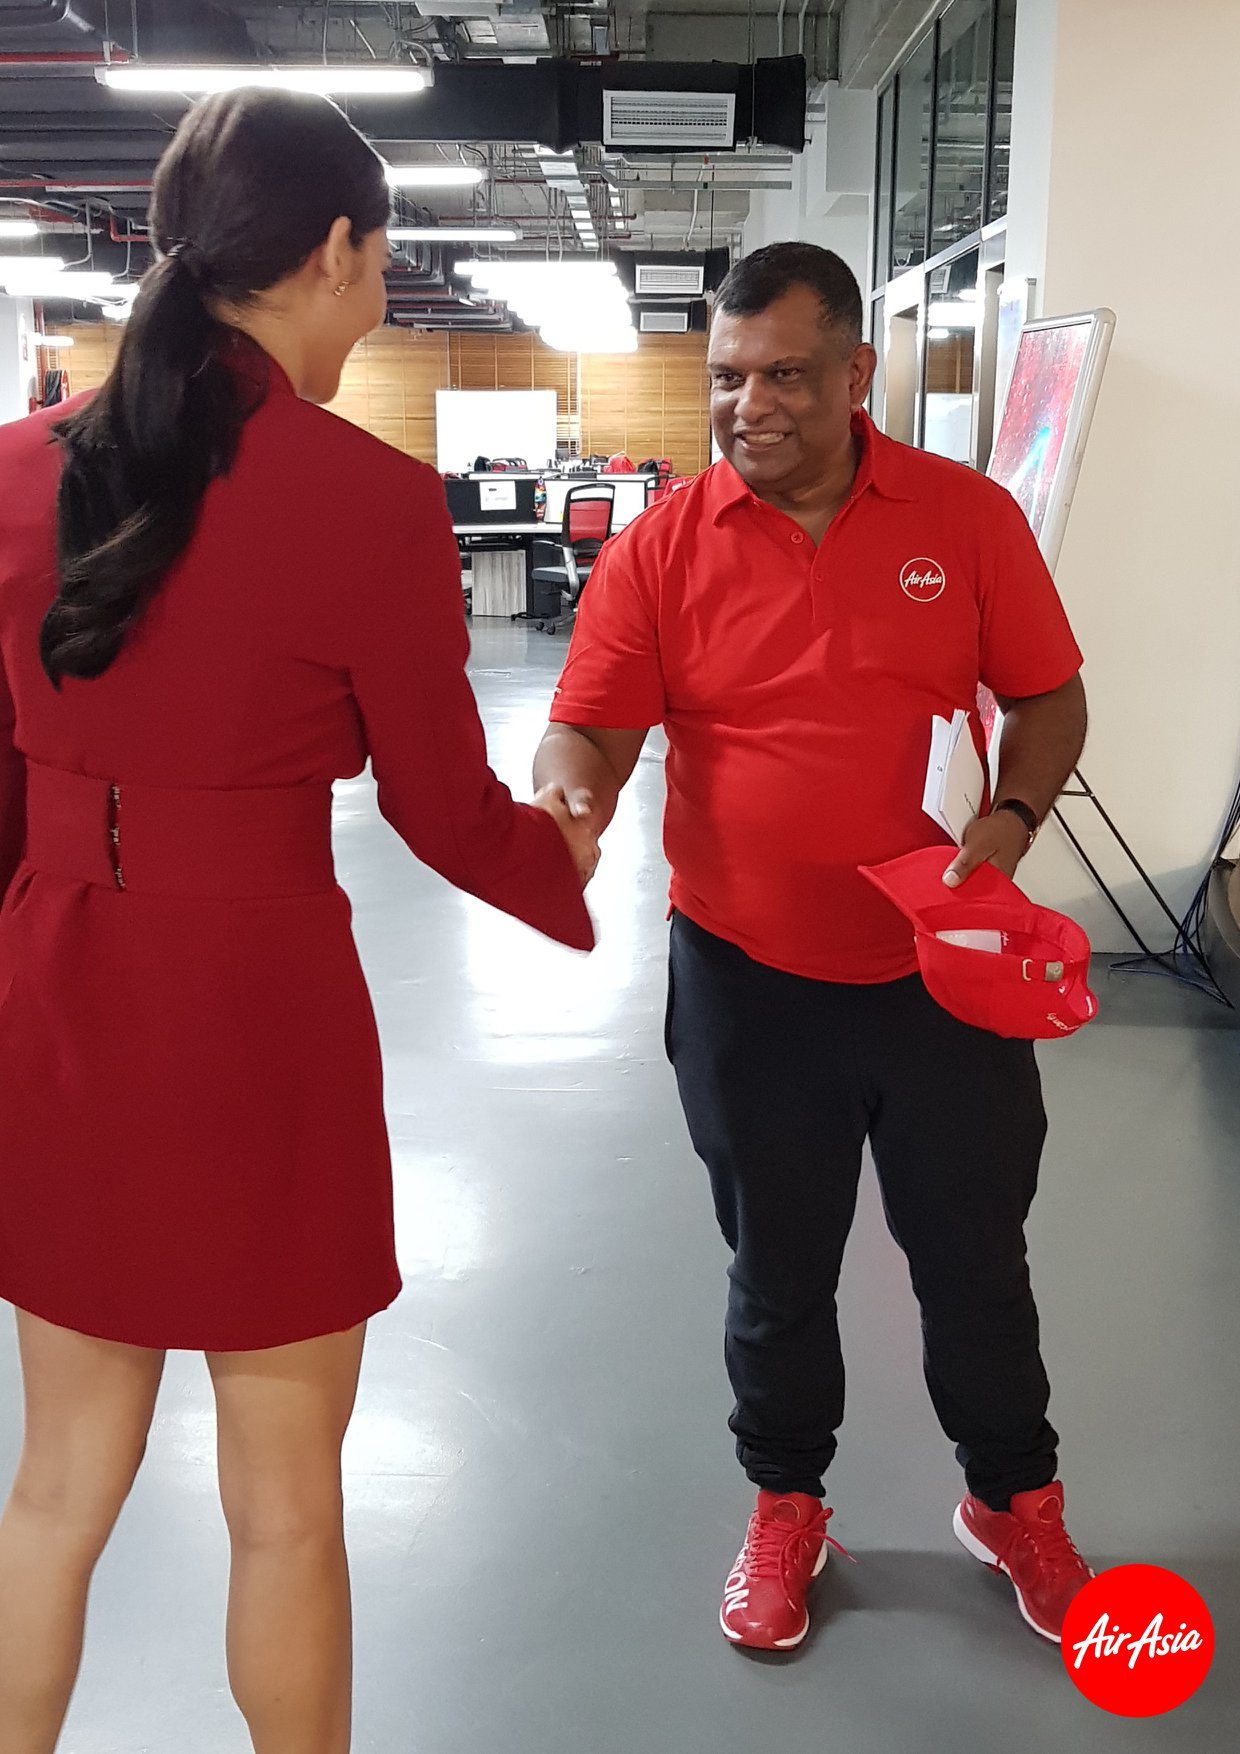 GREETINGS. Pia meets AirAsia CEO Tony Fernandes in Malaysia.    